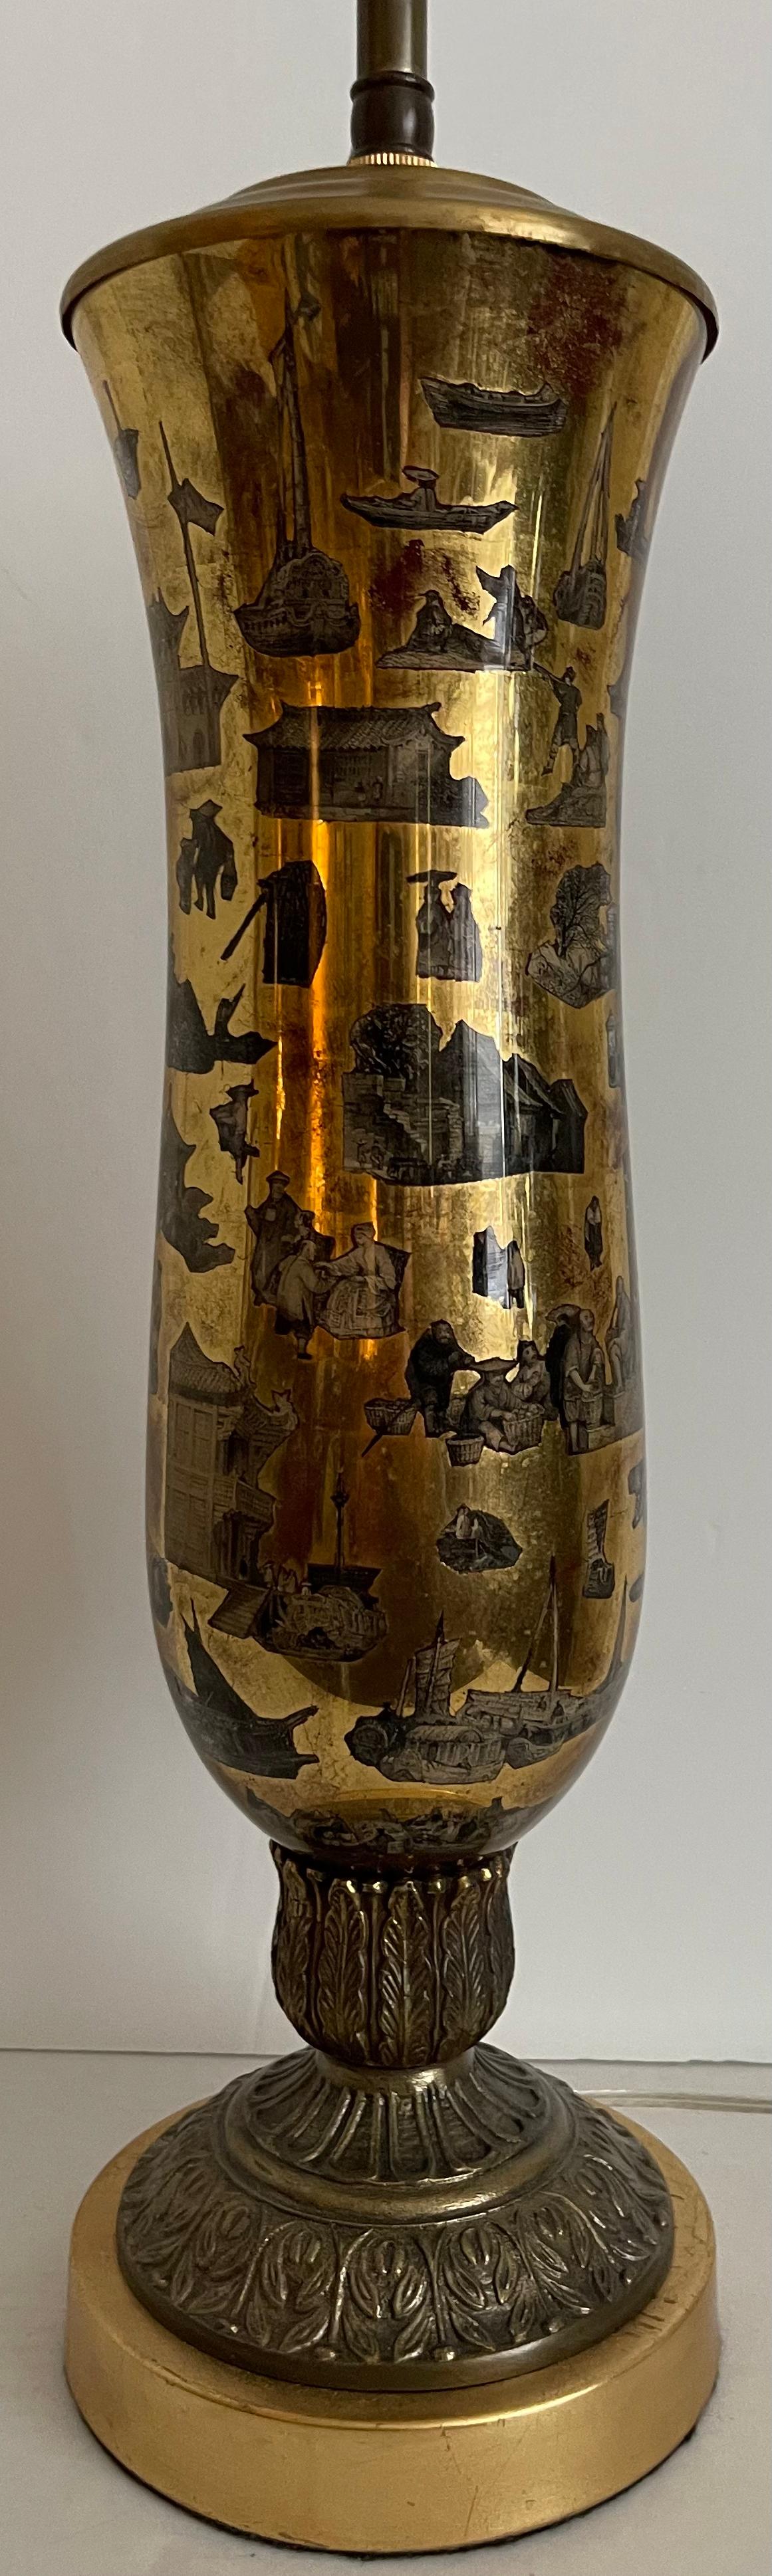 1930s Gold Chinoiserie Decalcomania Table Lamp For Sale 2